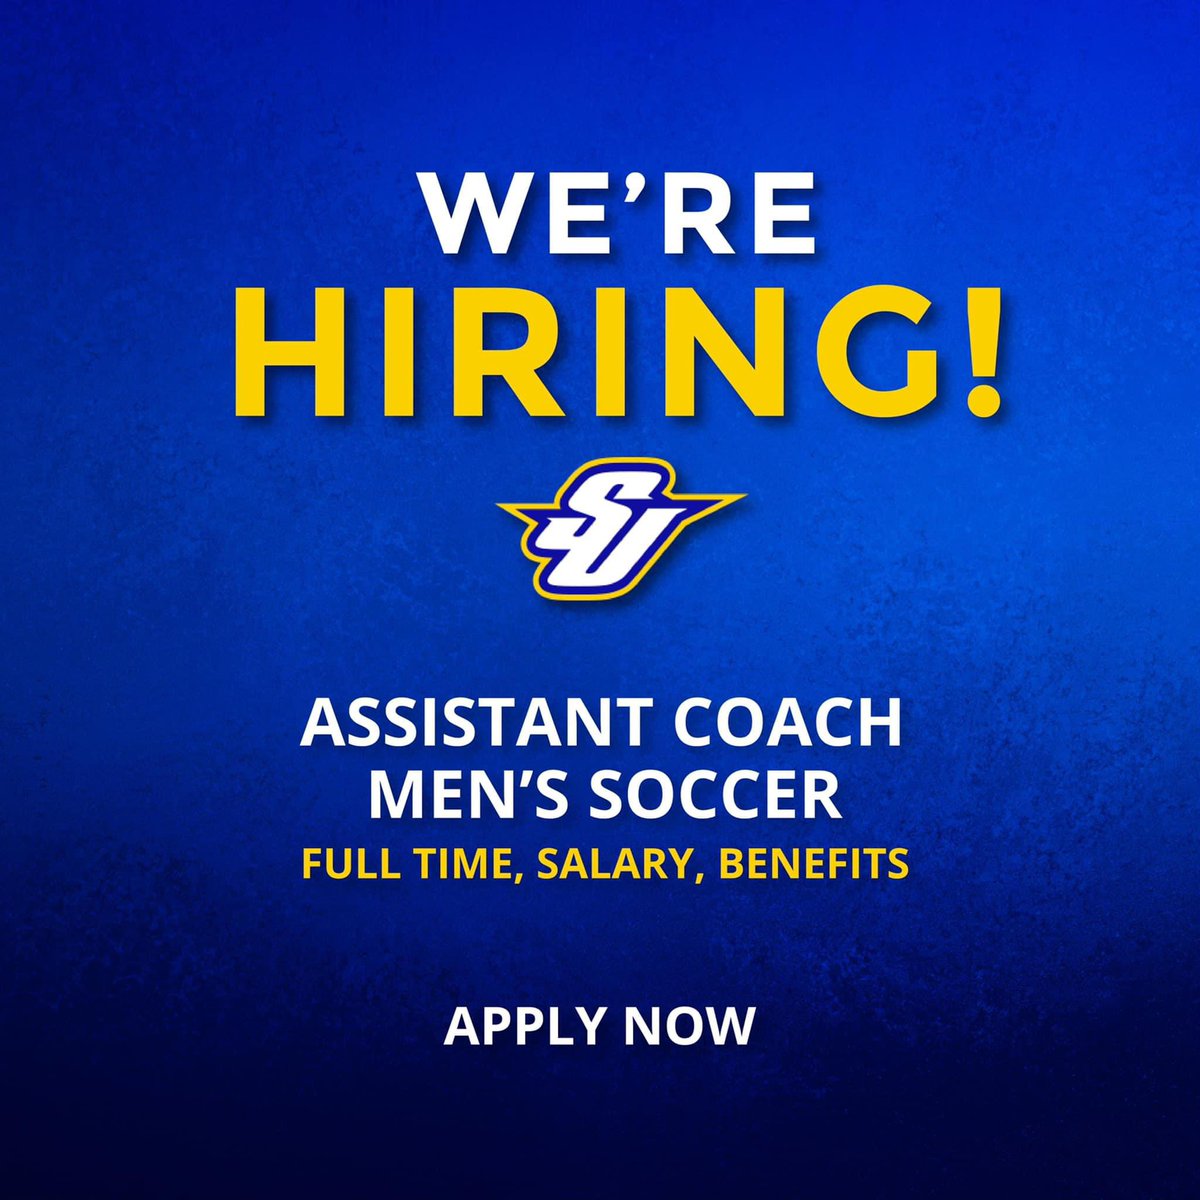 𝗪𝗘’𝗥𝗘 𝗛𝗜𝗥𝗜𝗡𝗚! Assistant Coach with @SpaldingUSoccer - accepting applications through this week. Looking for an individual who wants to make a career in college soccer, with supplemental club & camp opportunities available locally. APPLY: paycomonline.net/v4/ats/web.php…